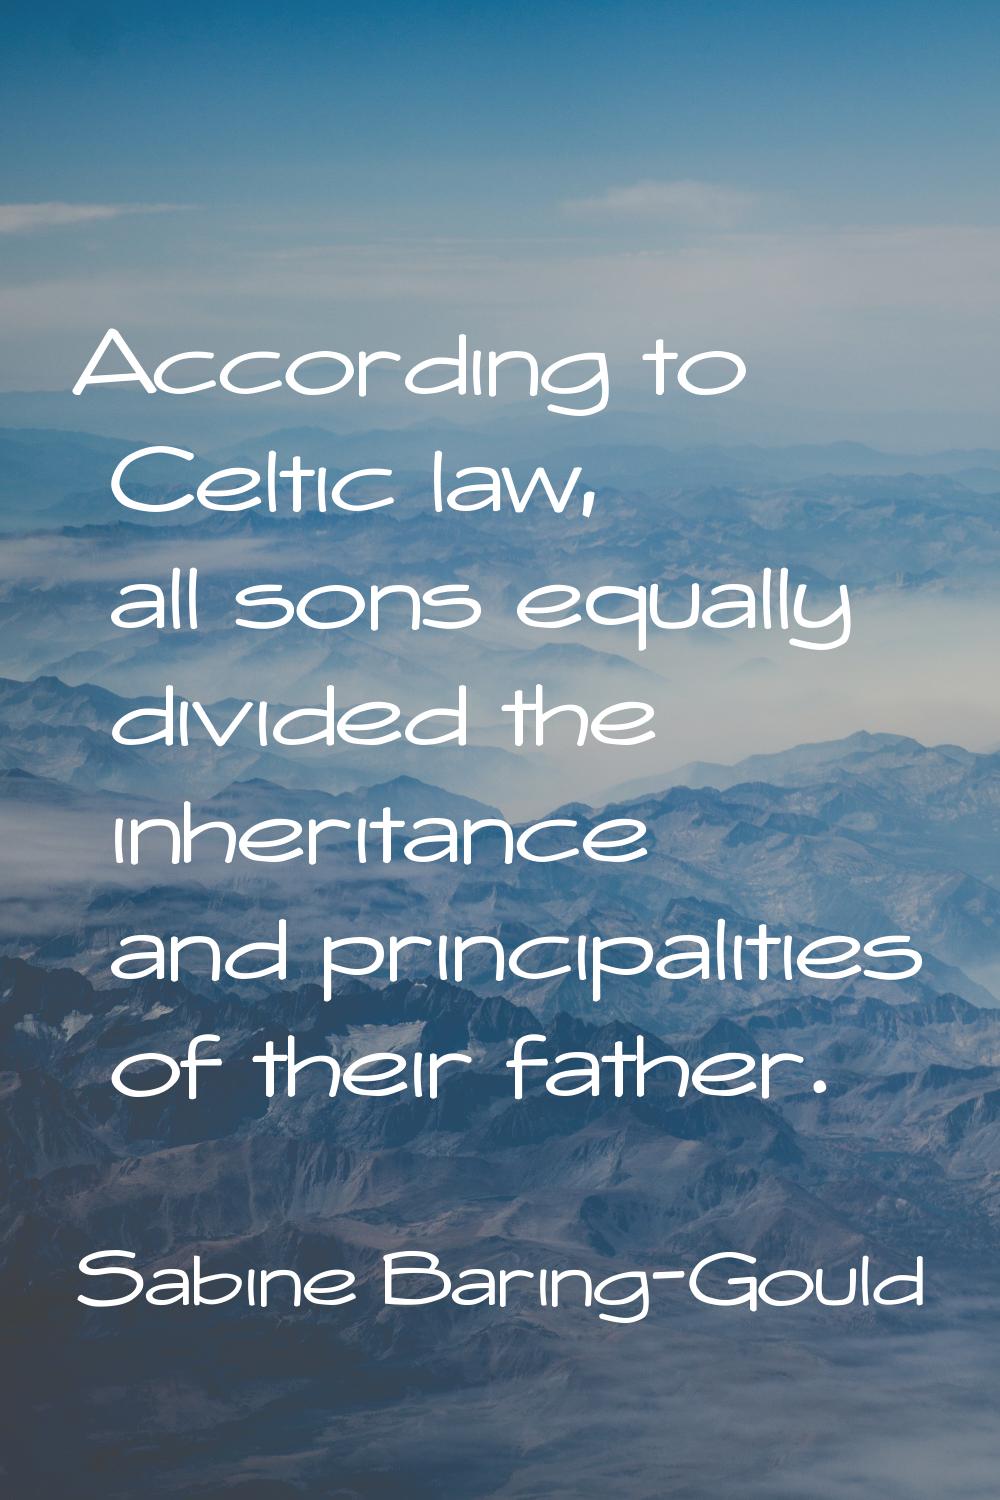 According to Celtic law, all sons equally divided the inheritance and principalities of their fathe